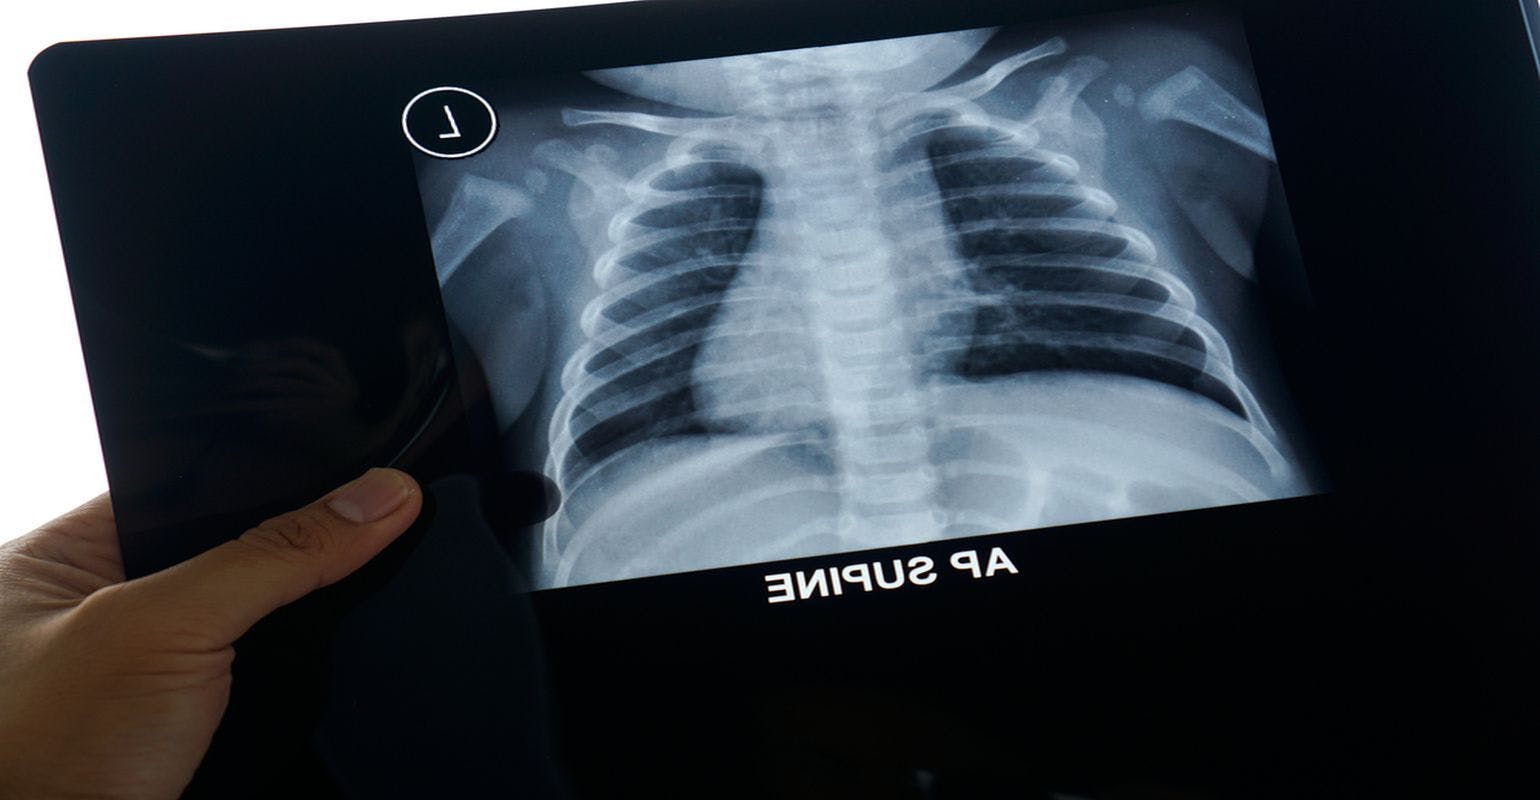 X-ray with Ultrasound Can Be Used to Manage Pneumonia in Children